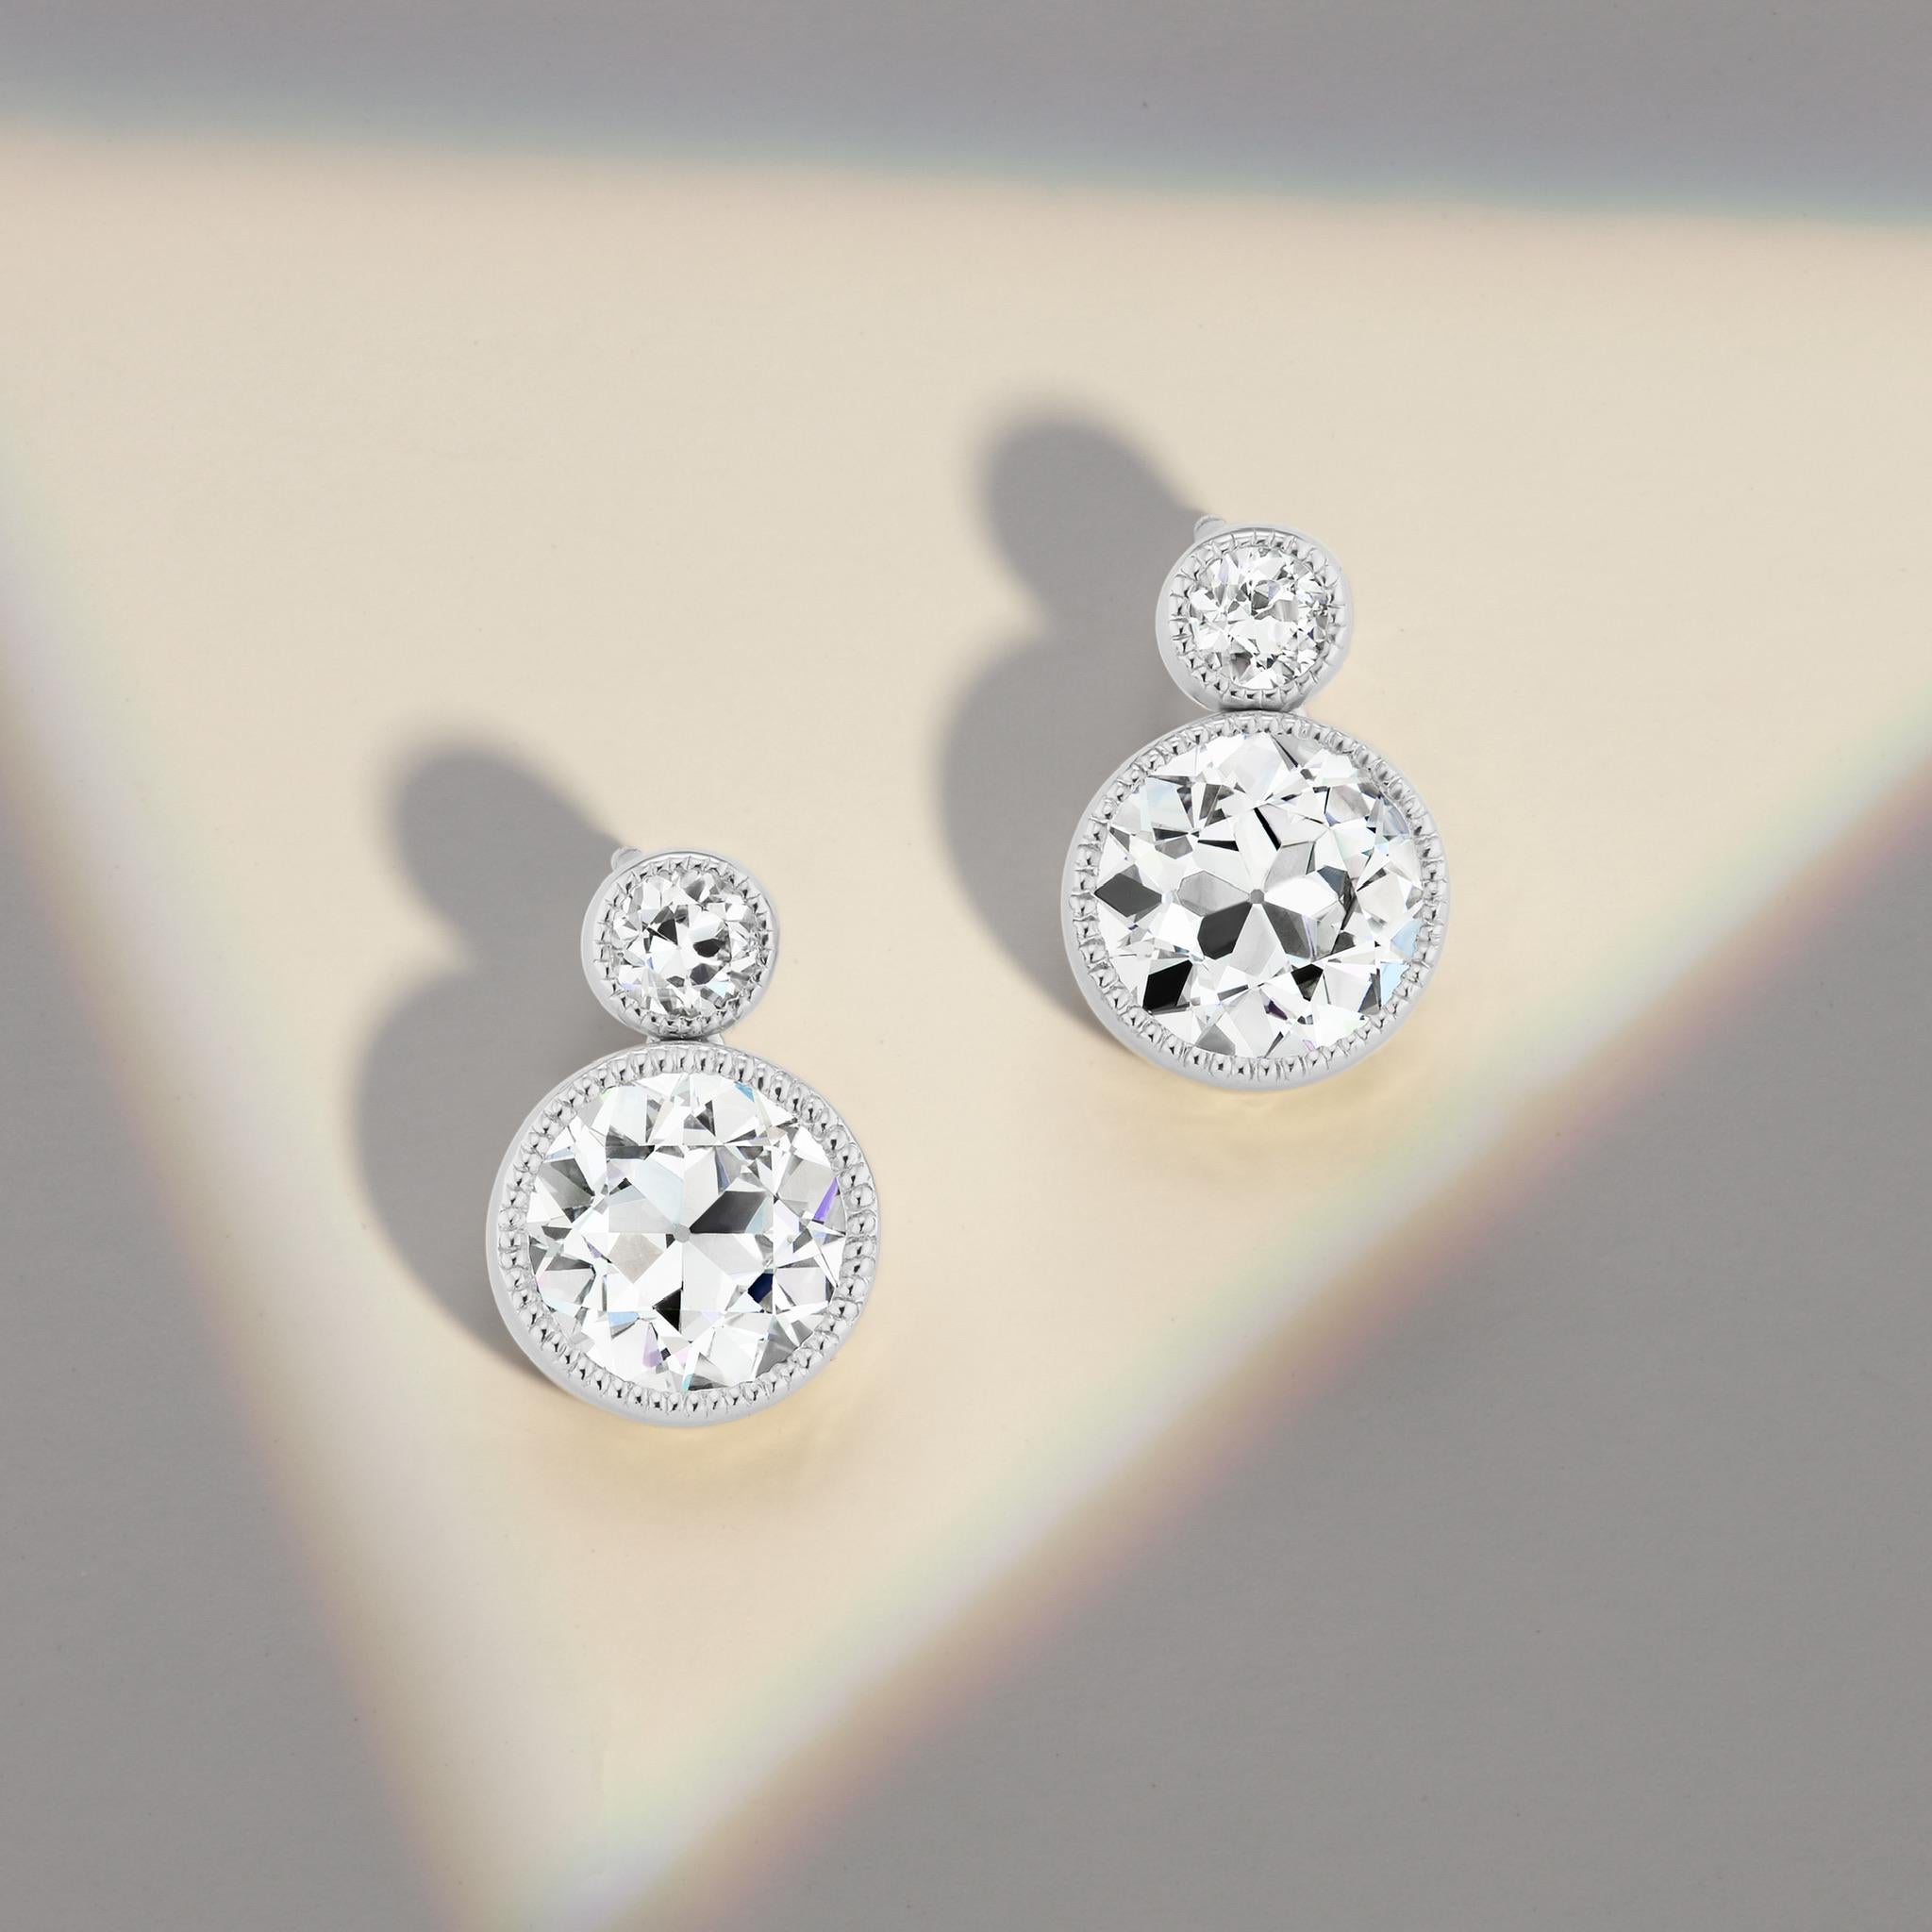 Old European Cut diamond and platinum earrings with a modern twist! These are not only spectacular and red carpet worthy, but also a perfect match of GIA certified H color VS1 clarity stones accented by matching 1/4 ct. stones. If you don't see